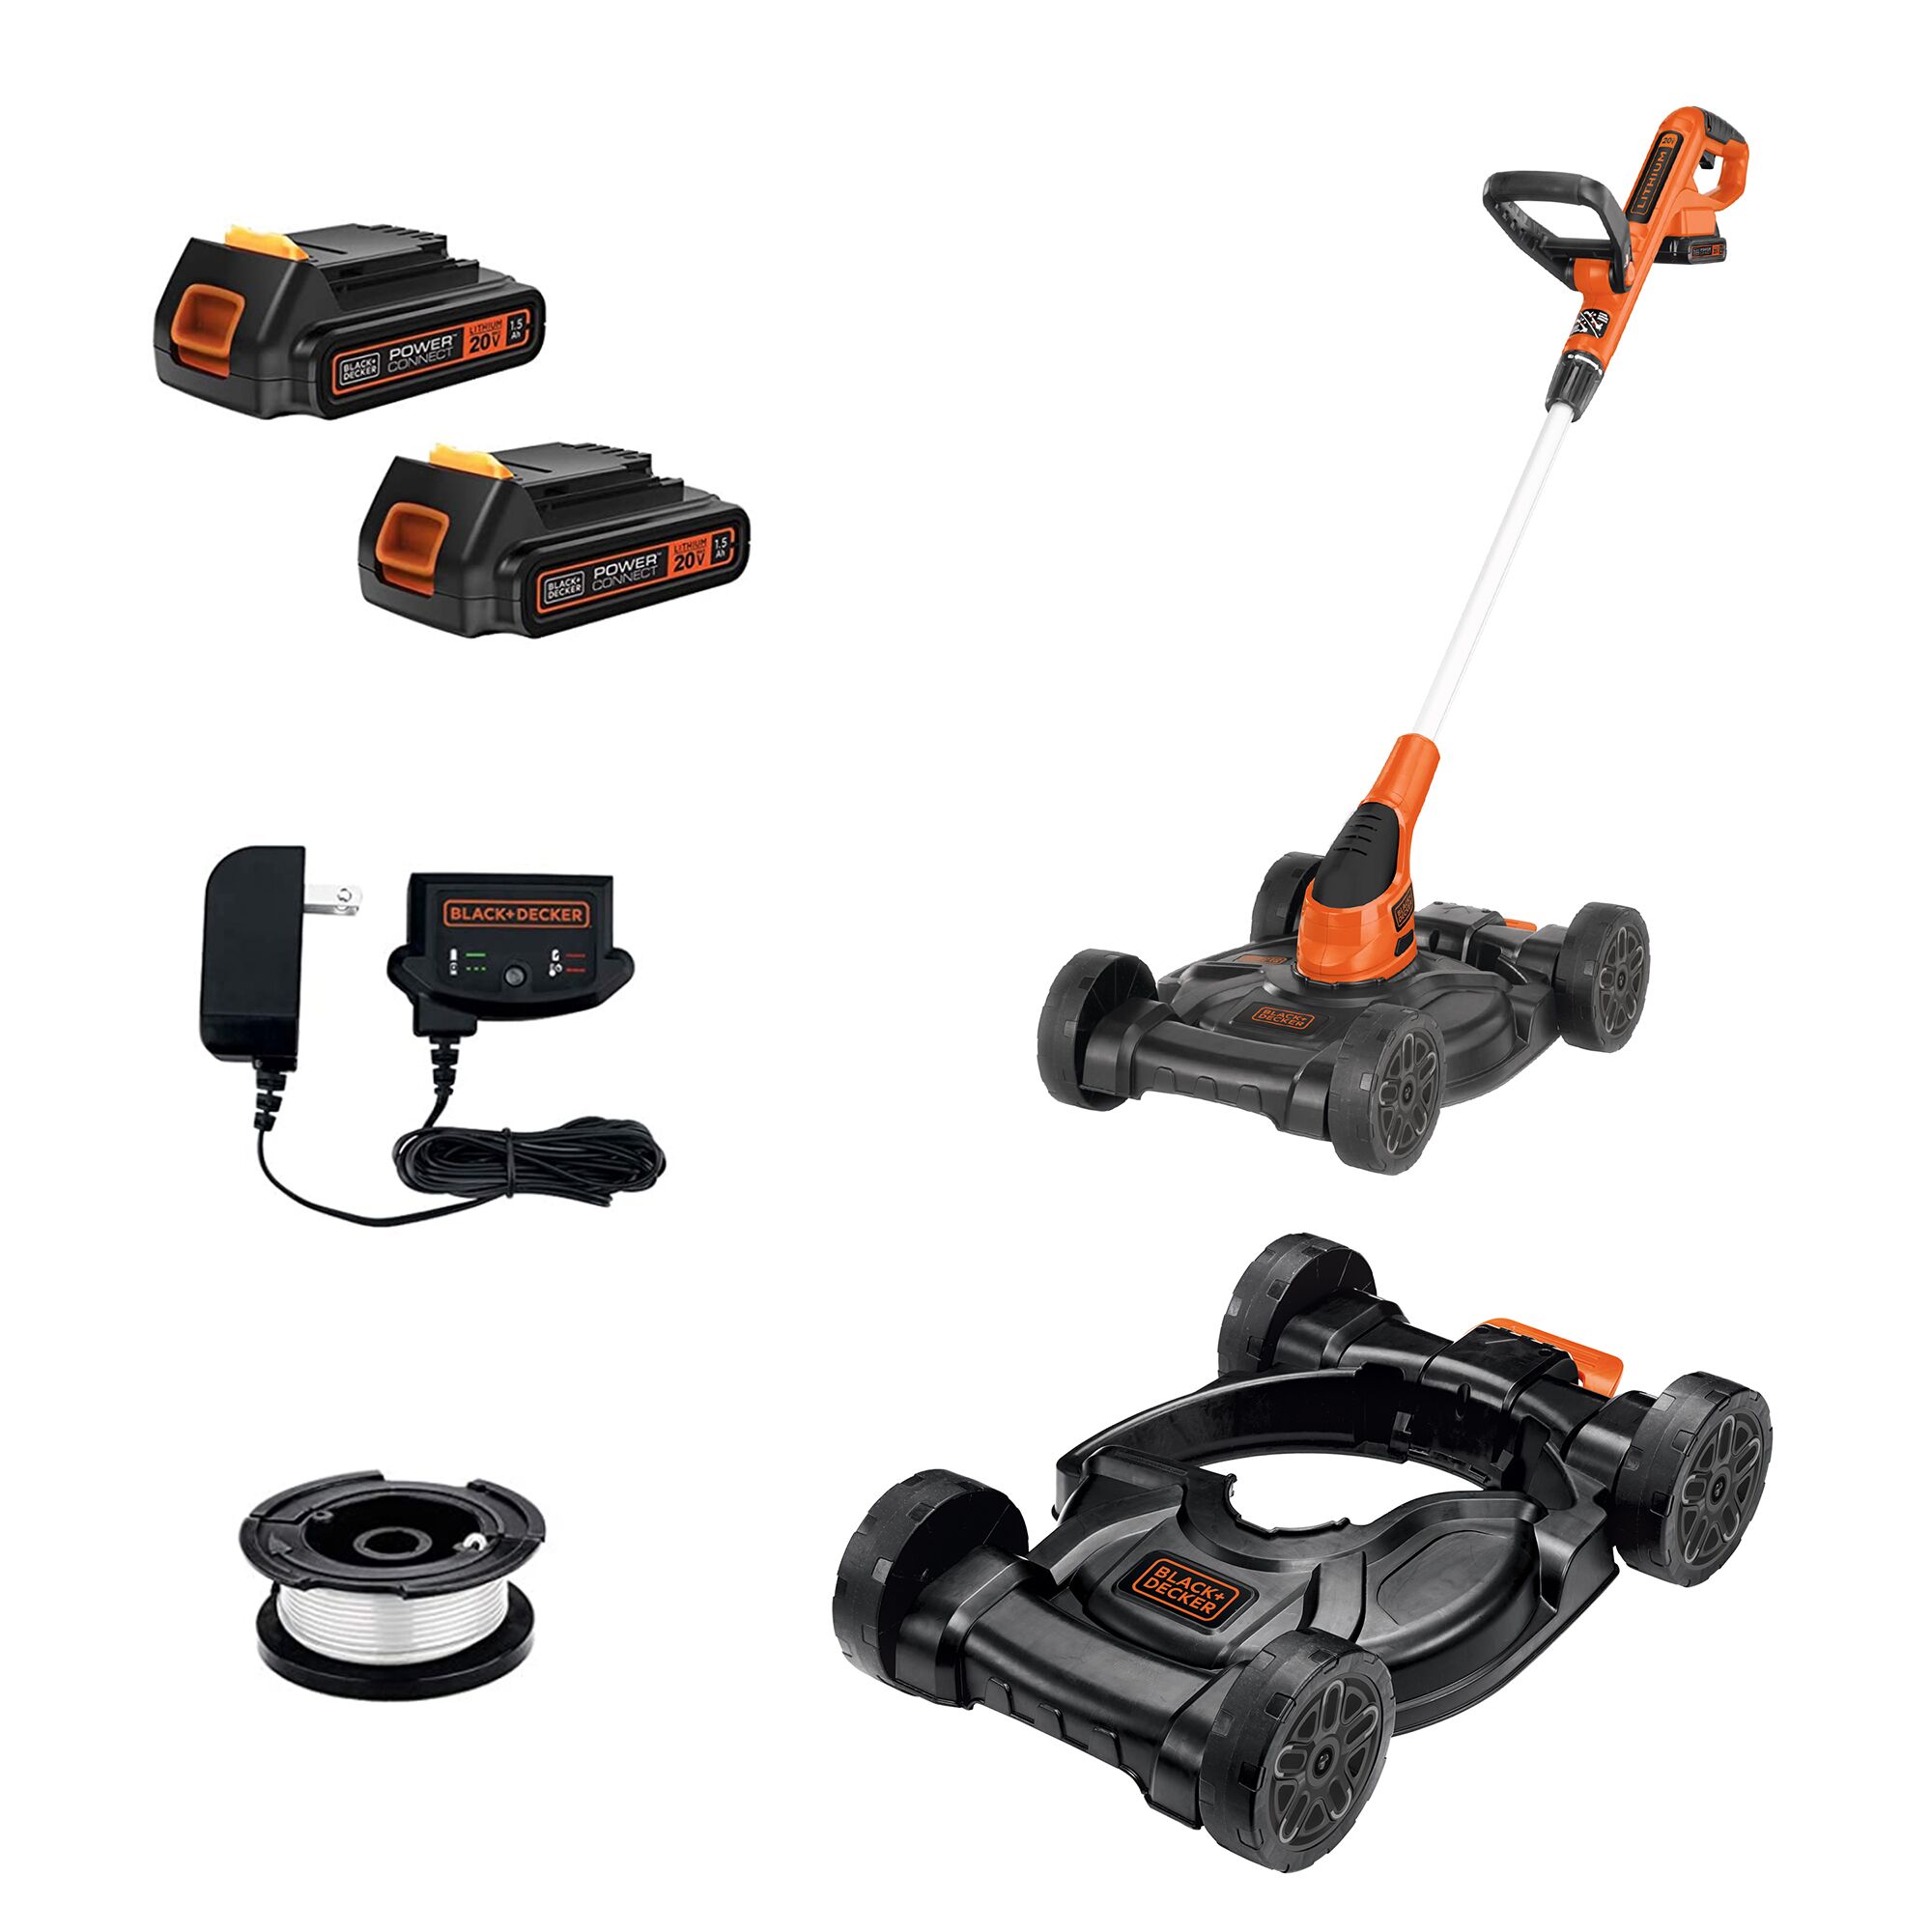 20V Max 3-In-1 Compact Mower components, batteries, charger, and spool of string on white background.